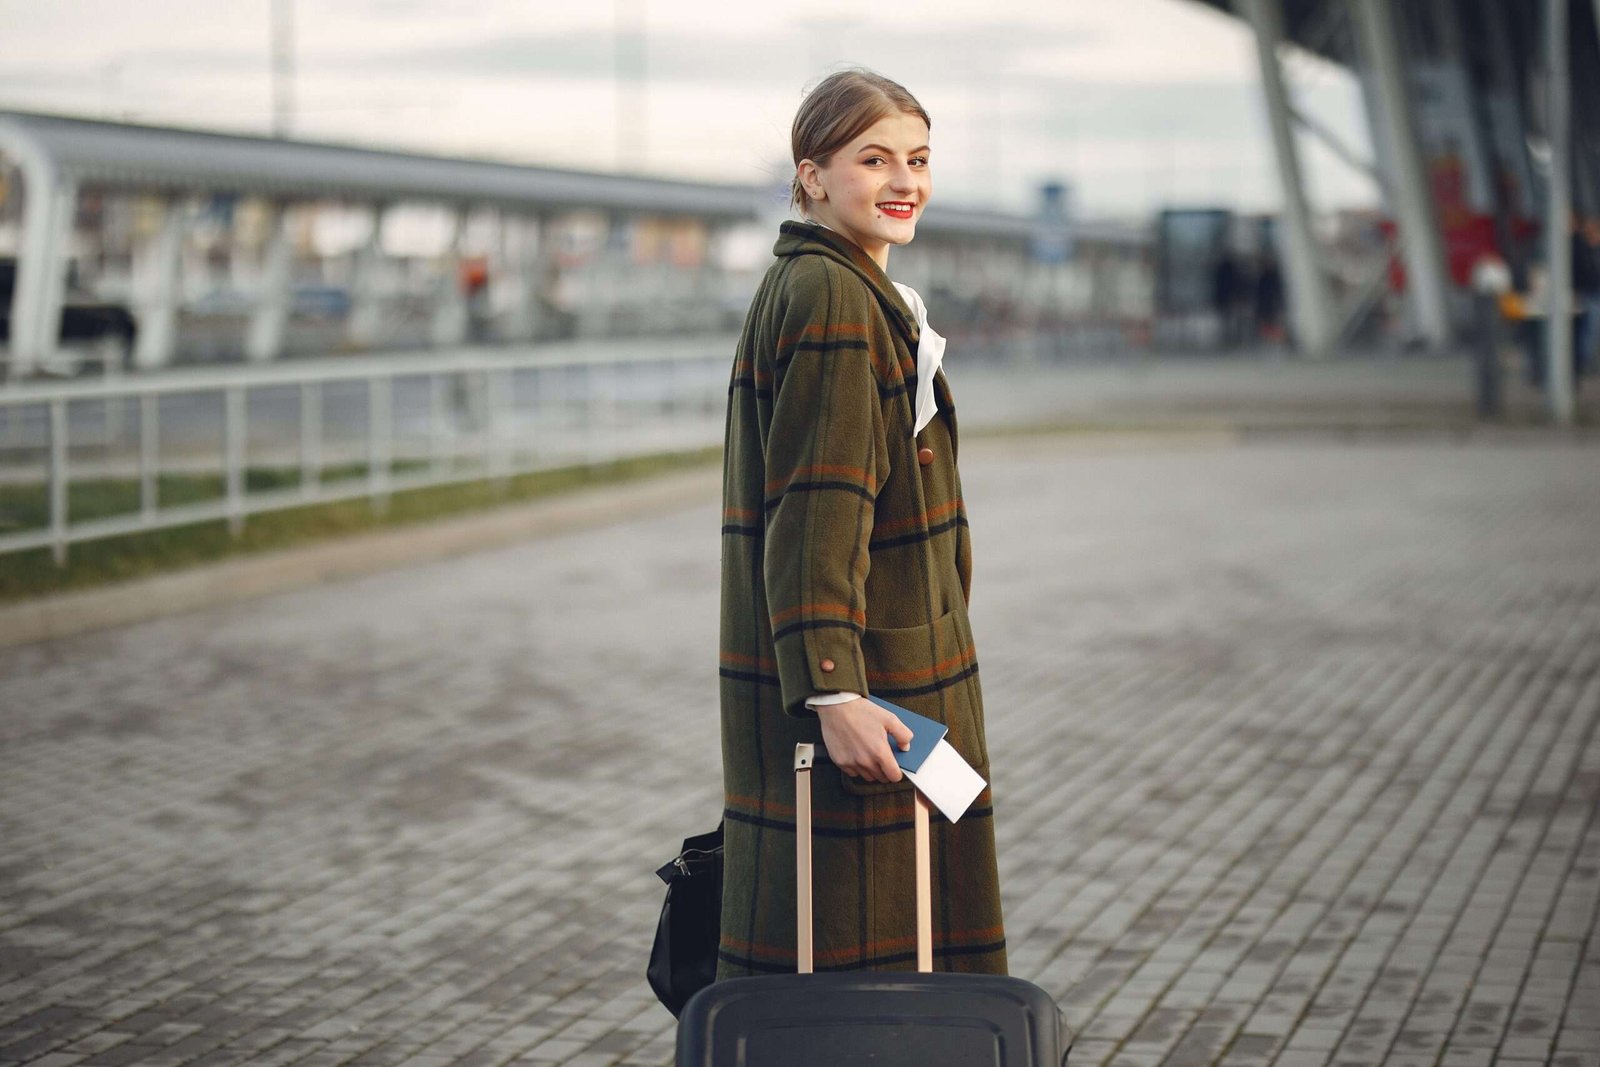 Photo by Gustavo Fring: https://www.pexels.com/photo/smiling-female-traveler-walking-with-suitcase-and-passport-near-train-station-3885530/